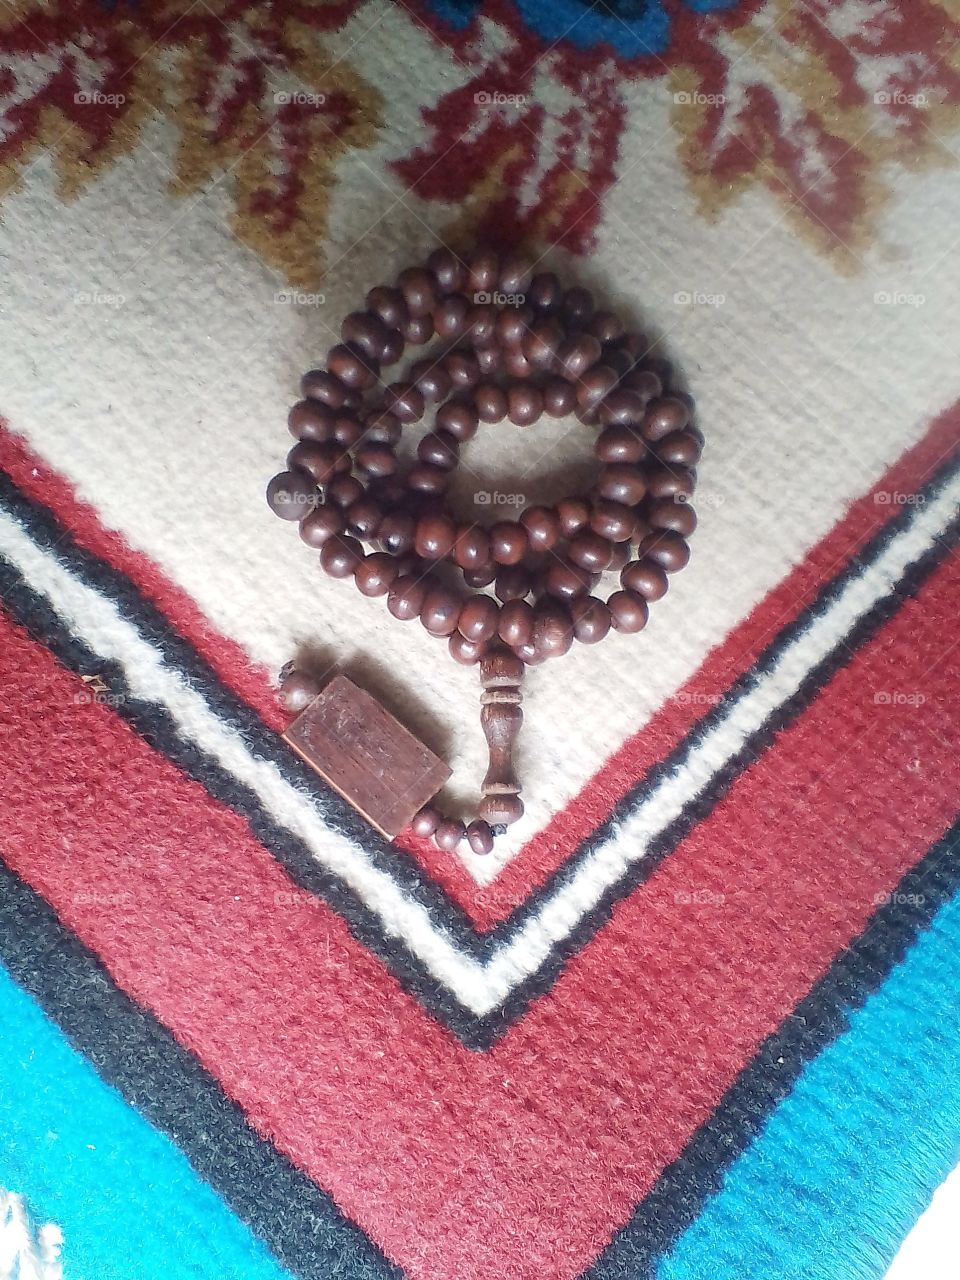 A rosary lay on the carpet